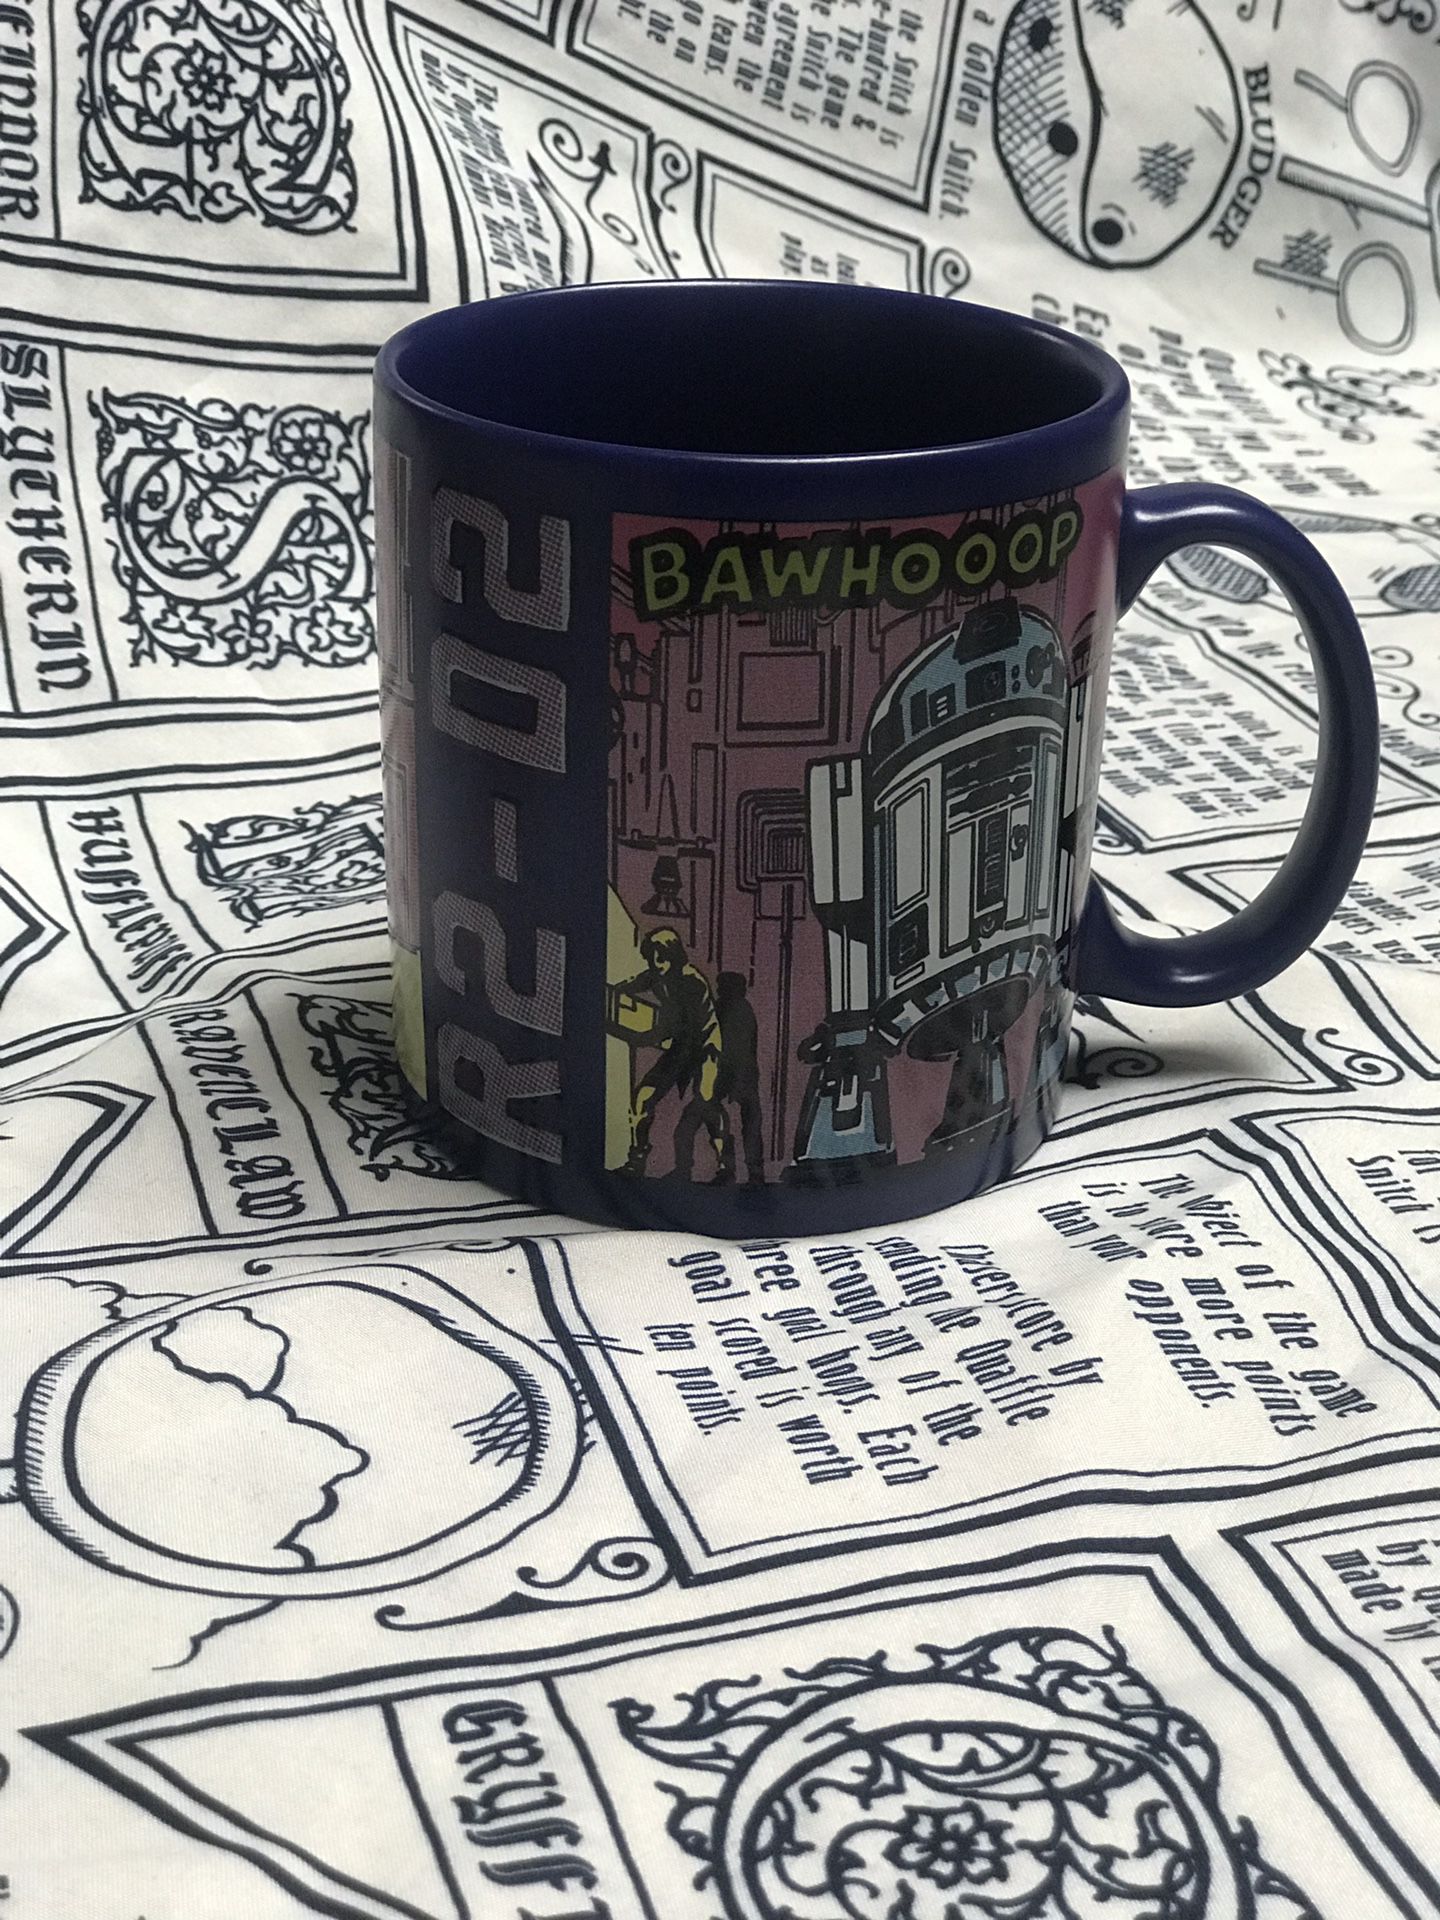 R2D2 from Star Wars Graphic Mug